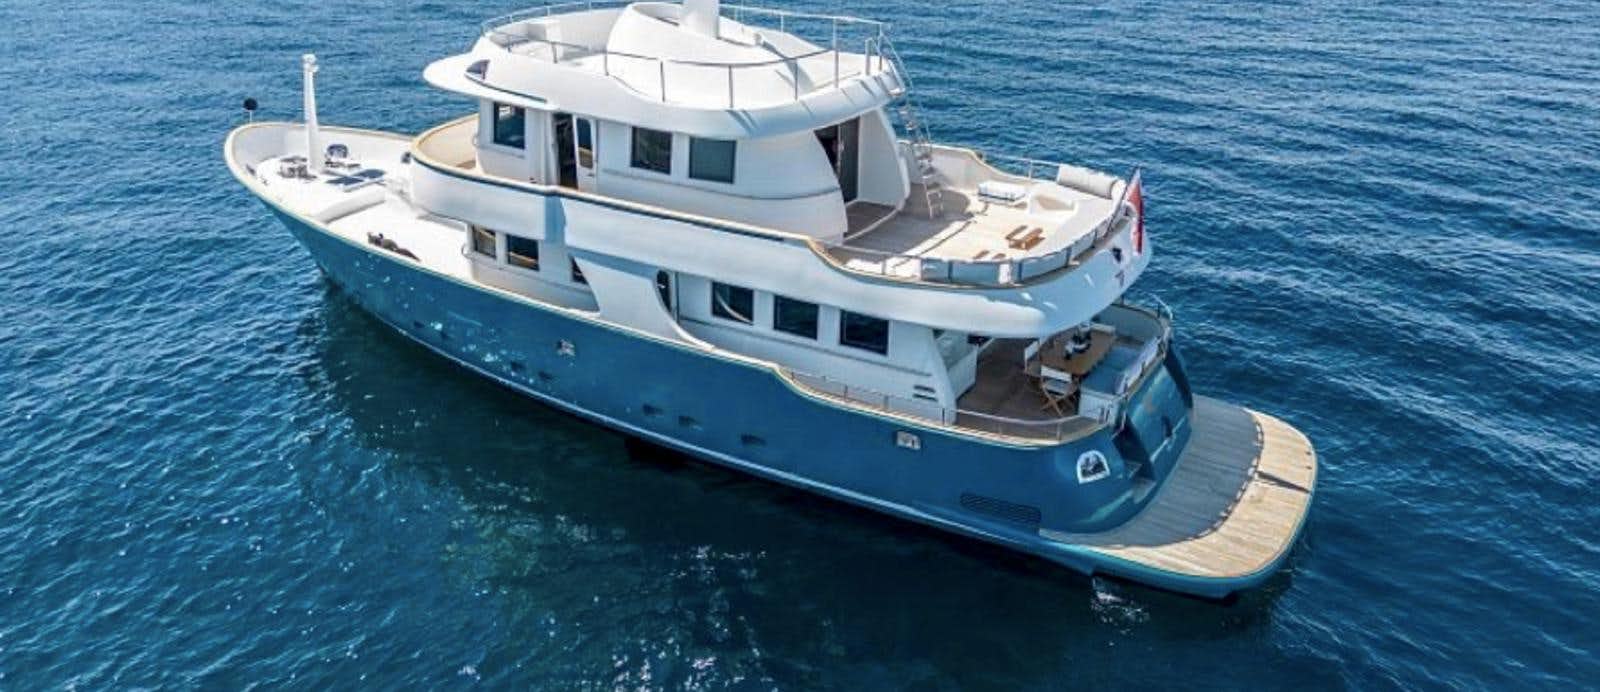 T88
Yacht for Sale